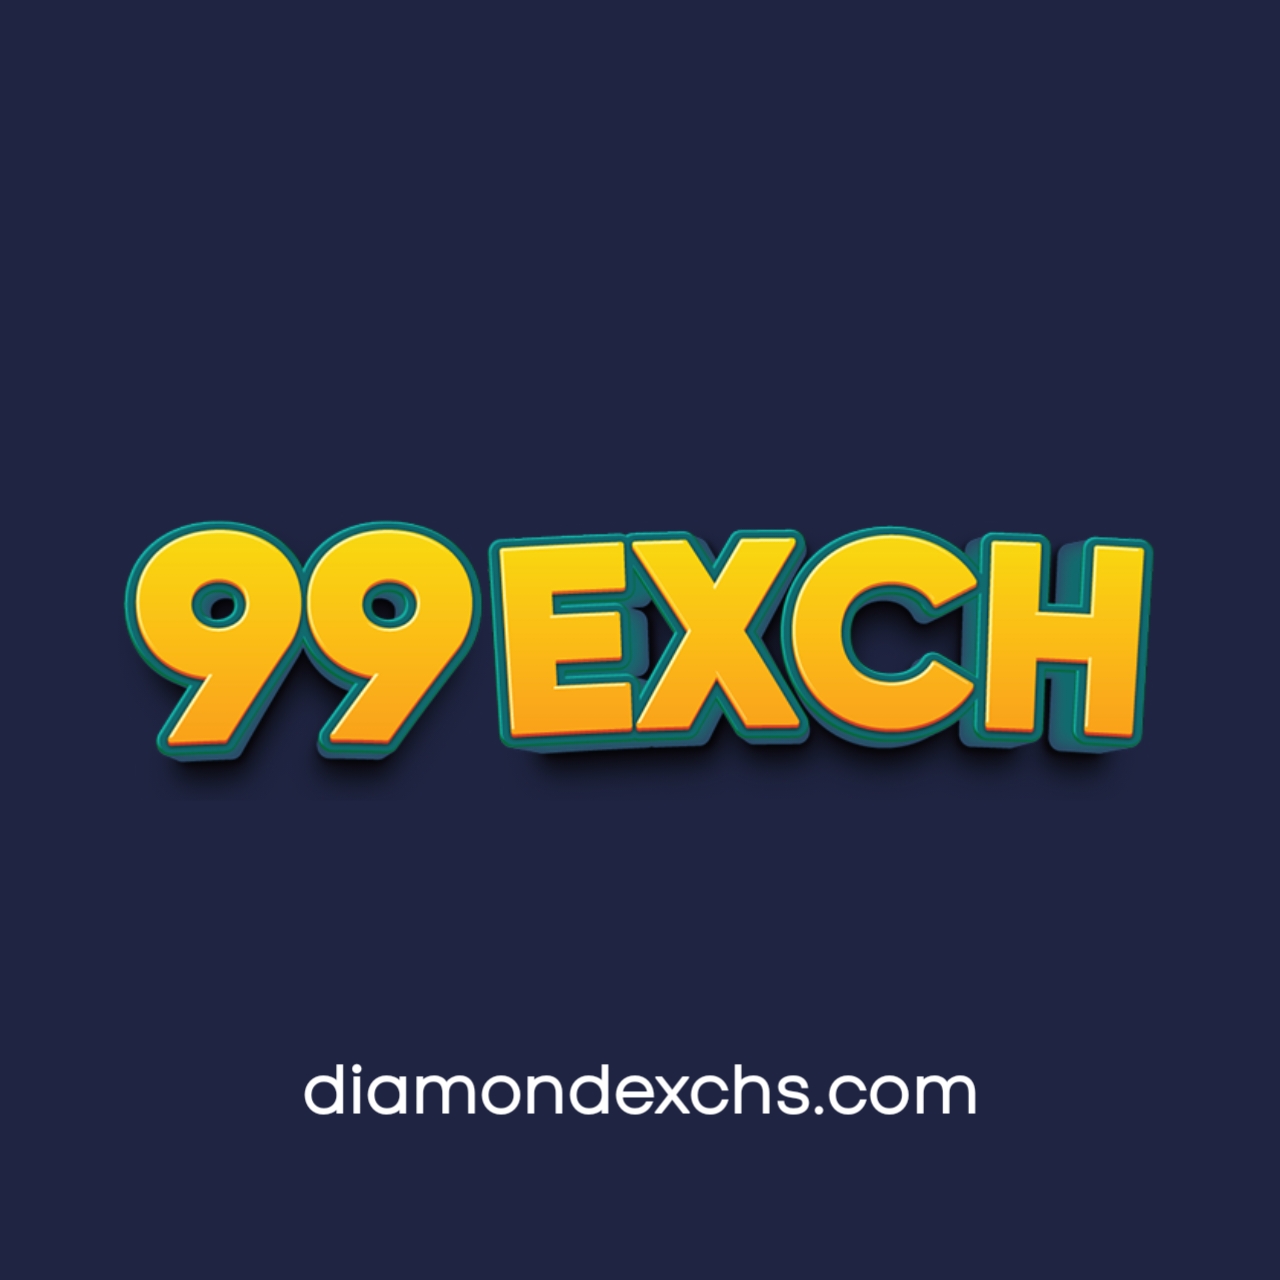 99exch